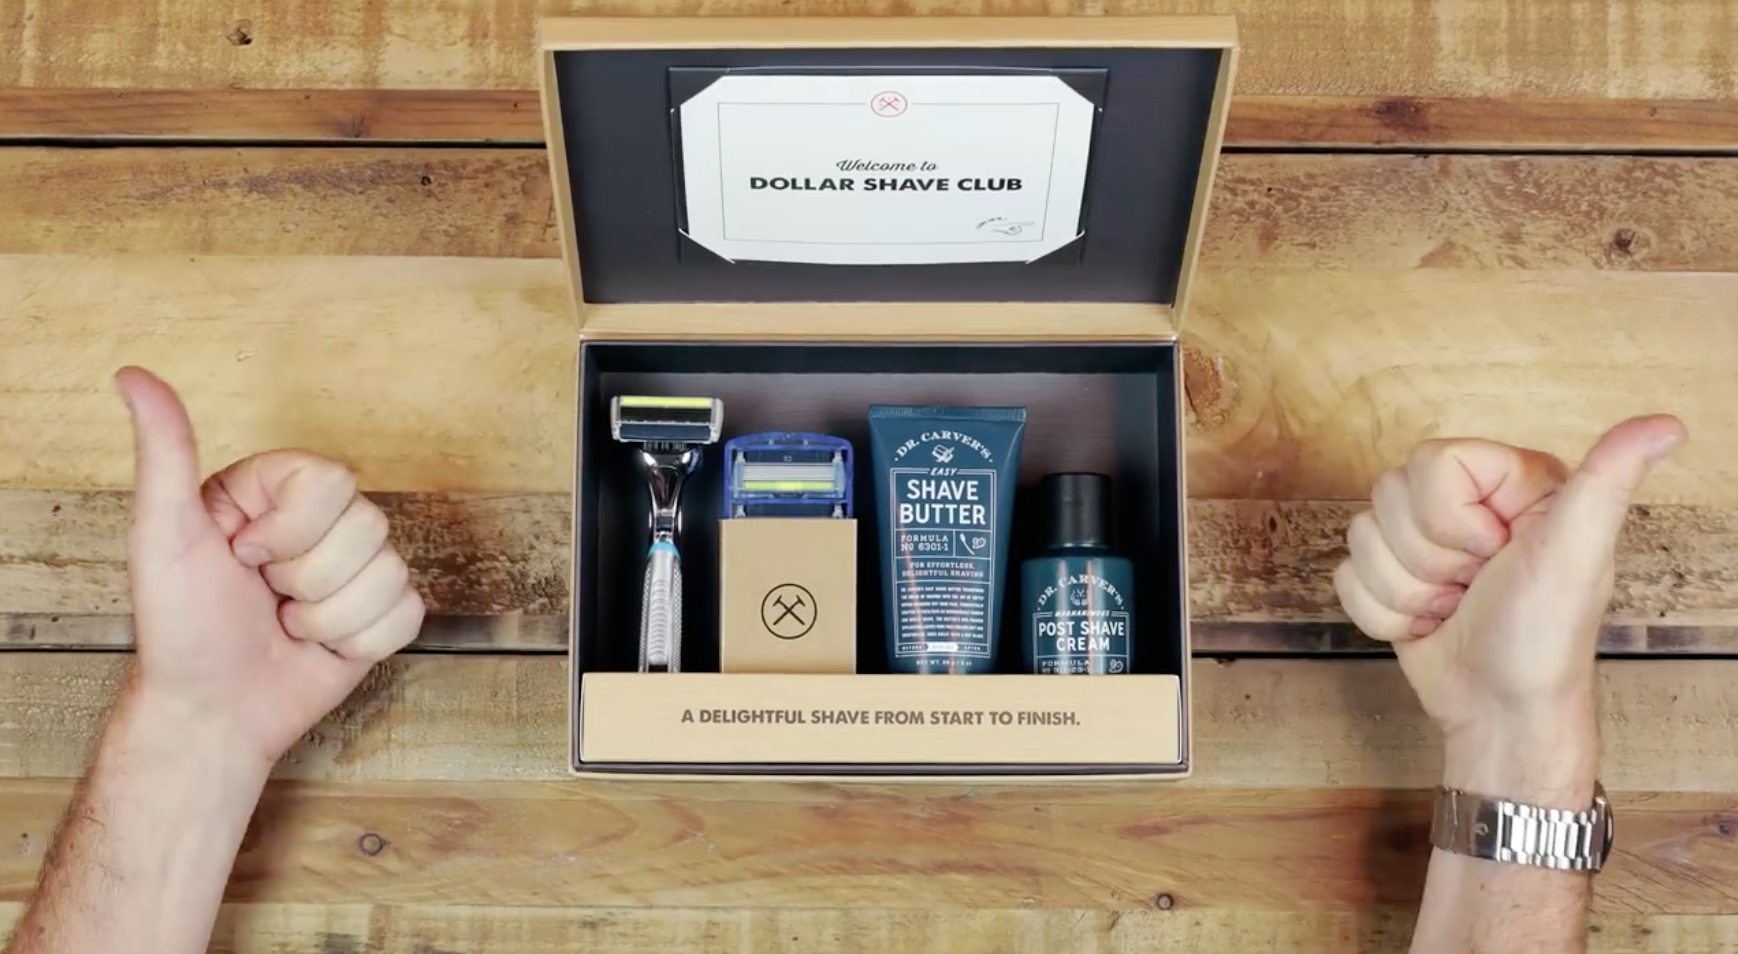 Fathers Day, Gift Box, Dollar Shave Club